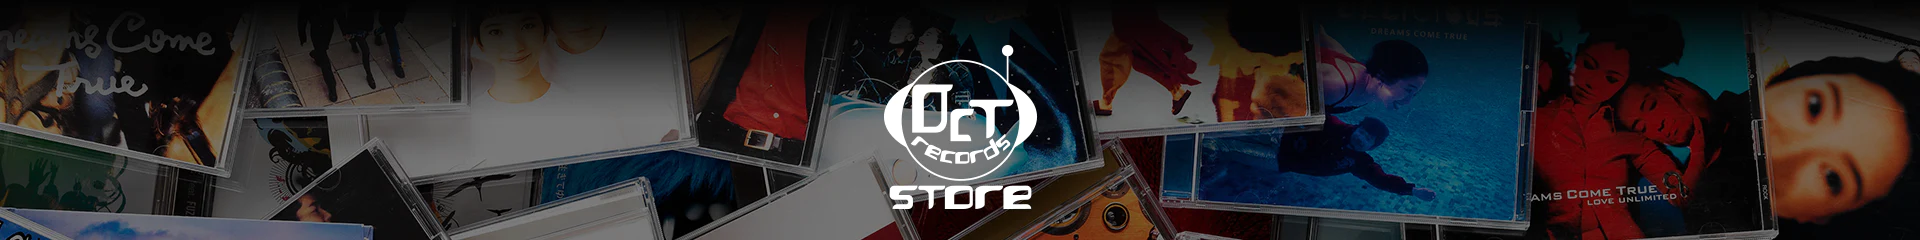 DCTrecords STORE